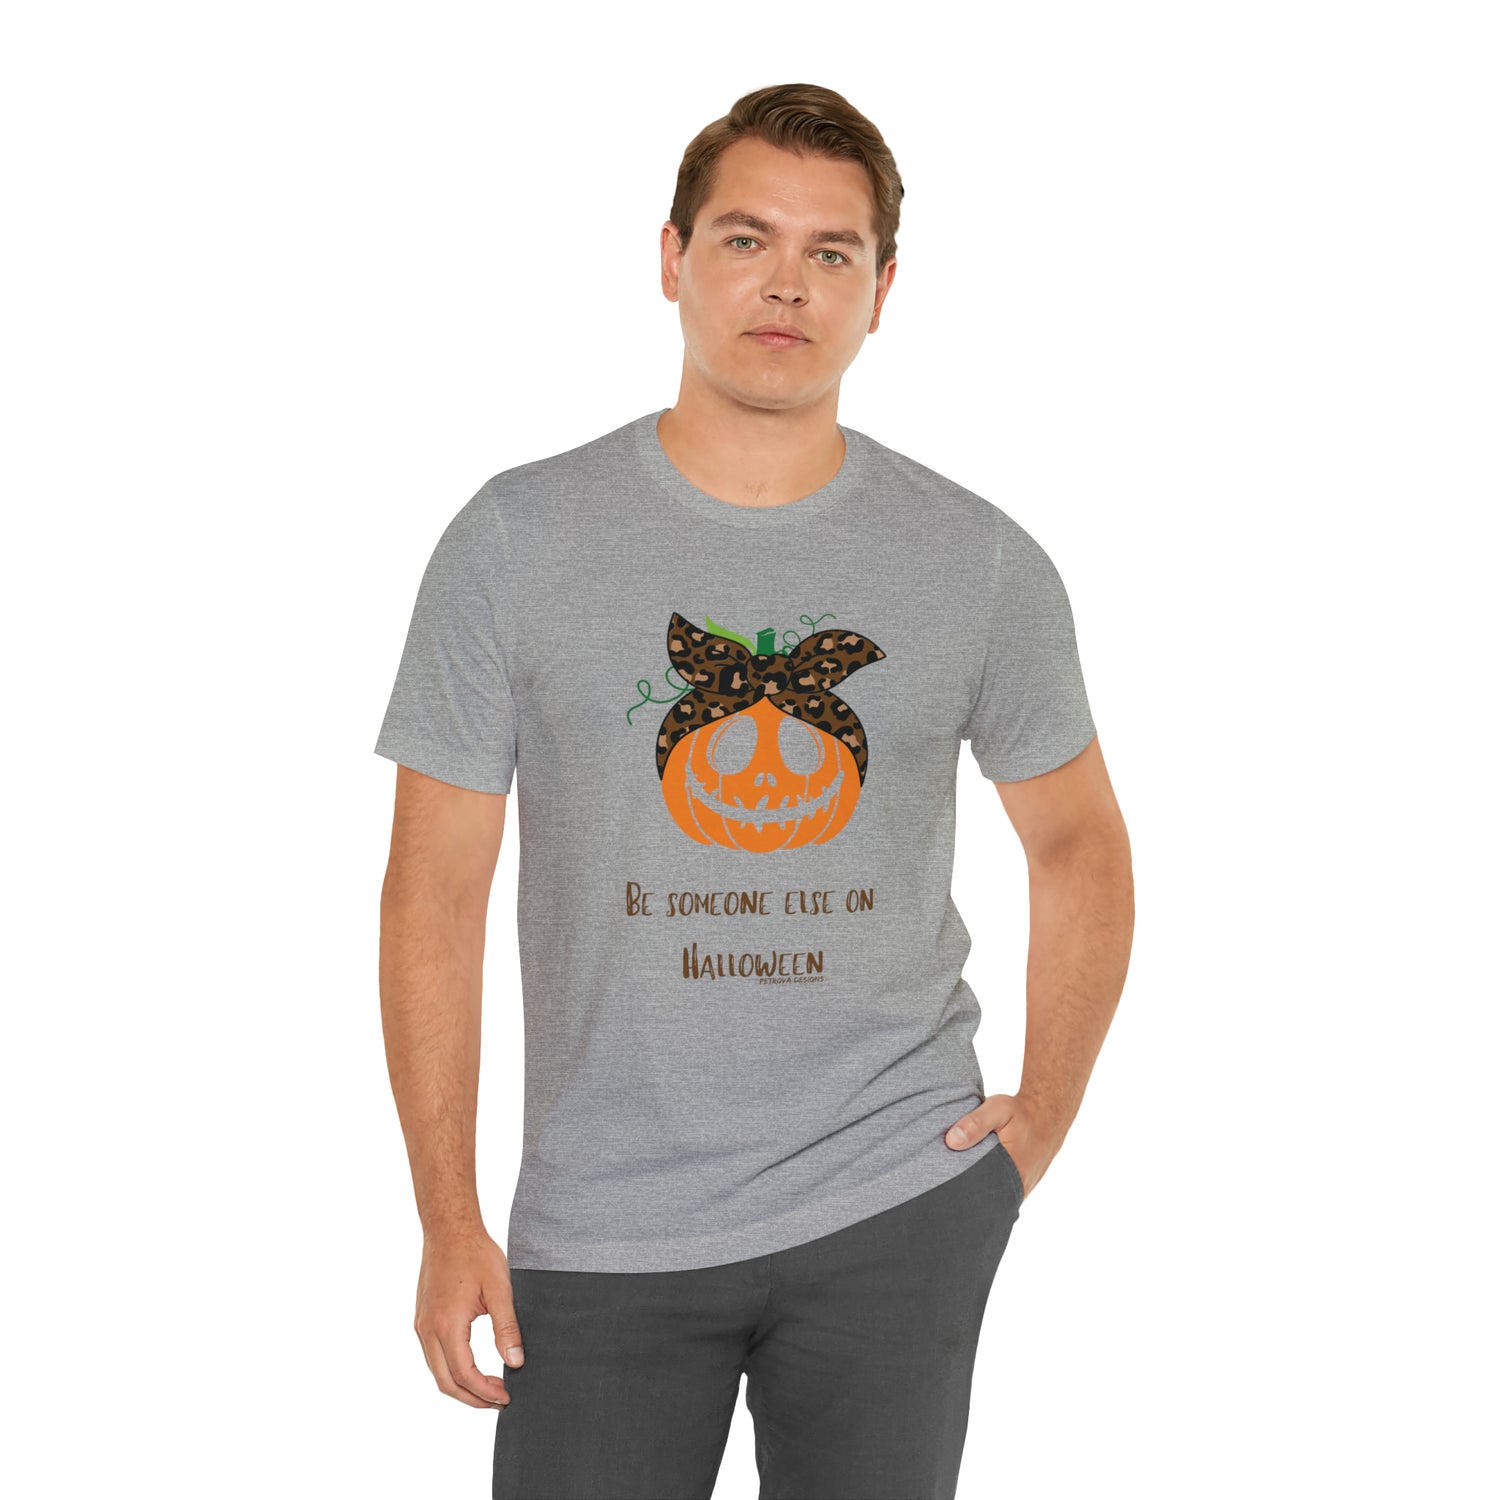 T-Shirt Tshirt Halloween Gift for Friends and Family Short Sleeve T Shirt Petrova Designs